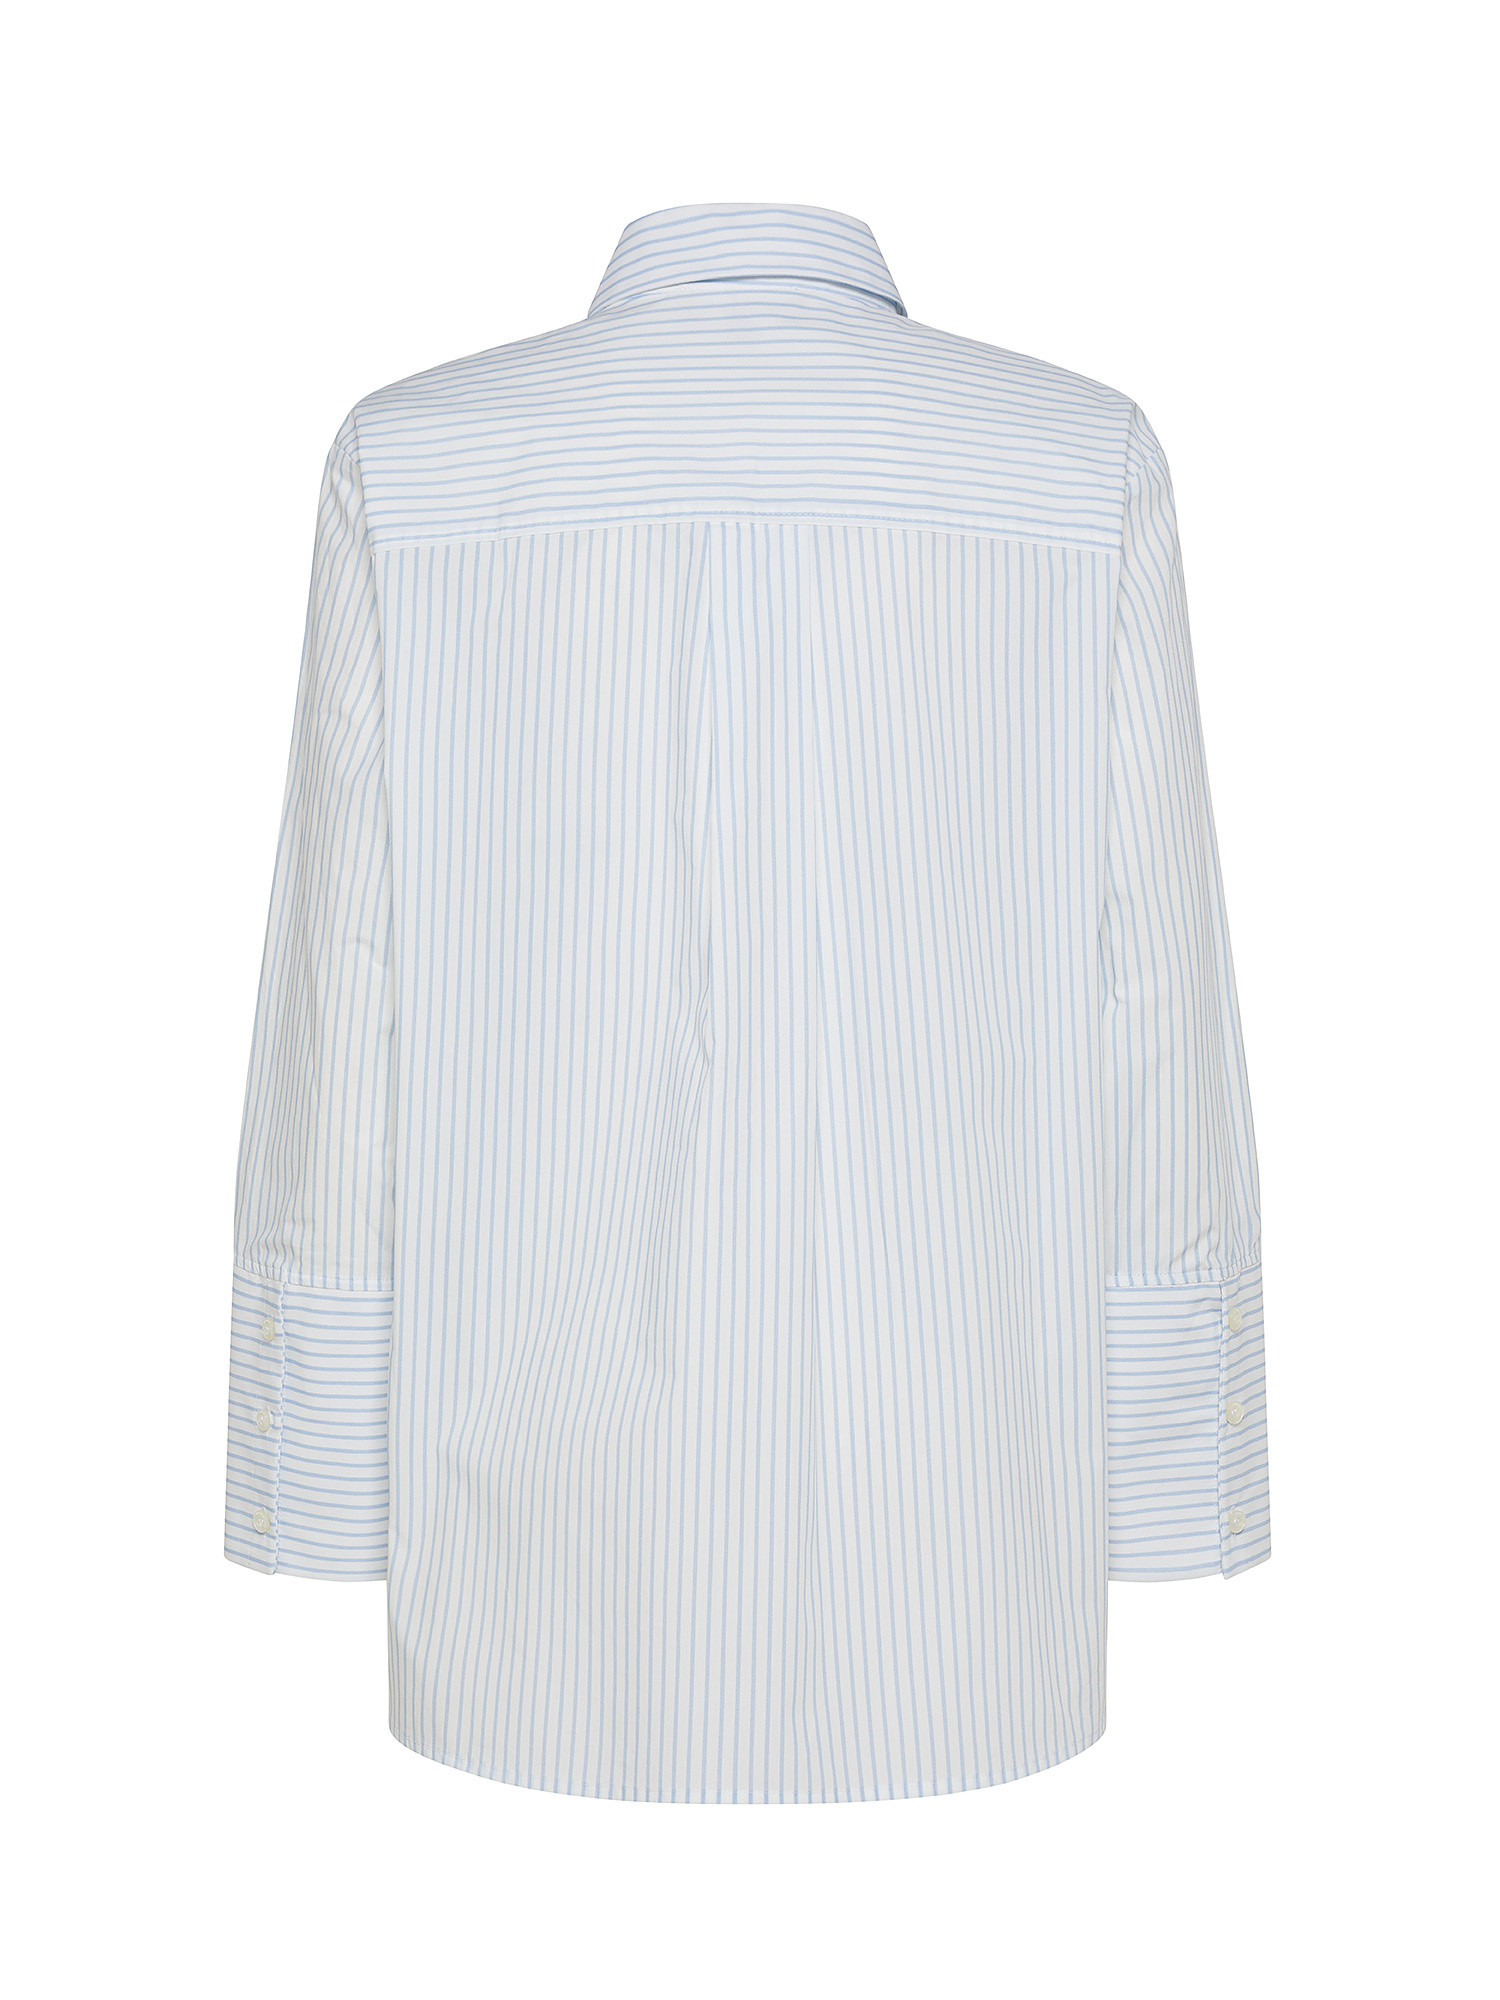 Emporio Armani - Striped shirt in cotton, White, large image number 1